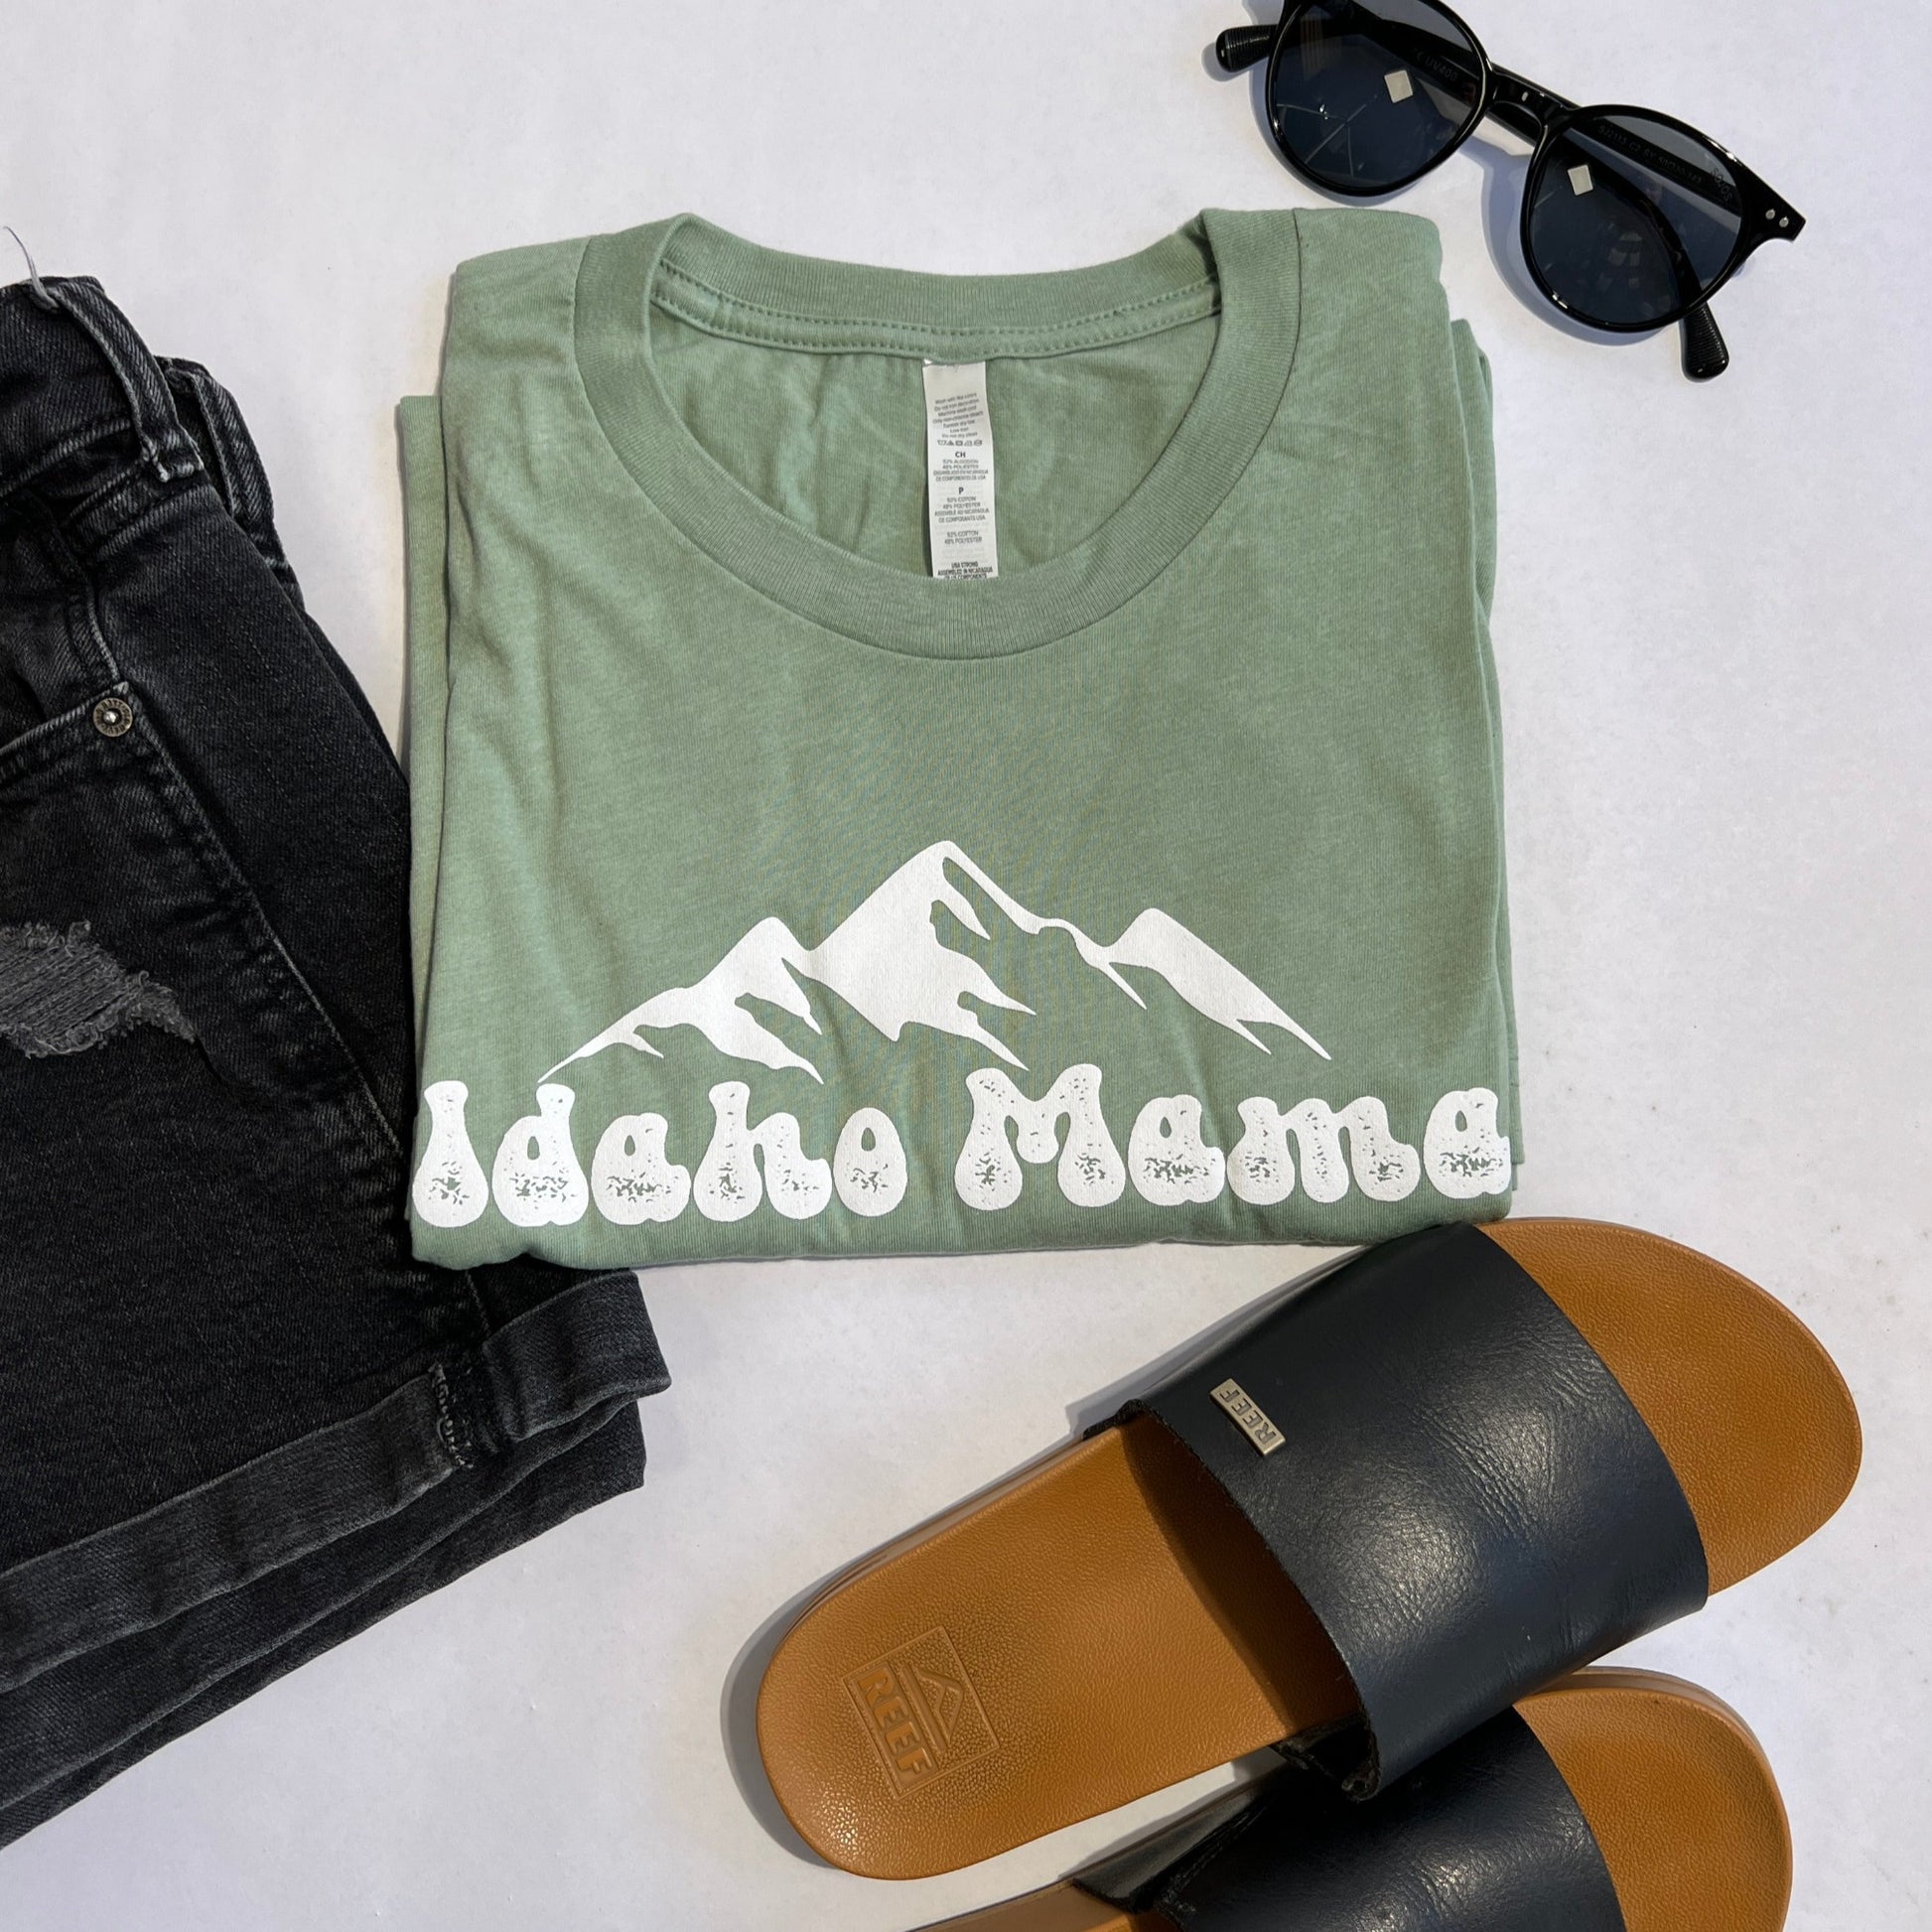 This Idaho Mama T Shirt is designed and screen printed in Idaho. It is a product of TatorJo, an Idaho Apparel Company. This T shirt has Idaho Mama written on the front. It is cute and cozy and oh so soft!